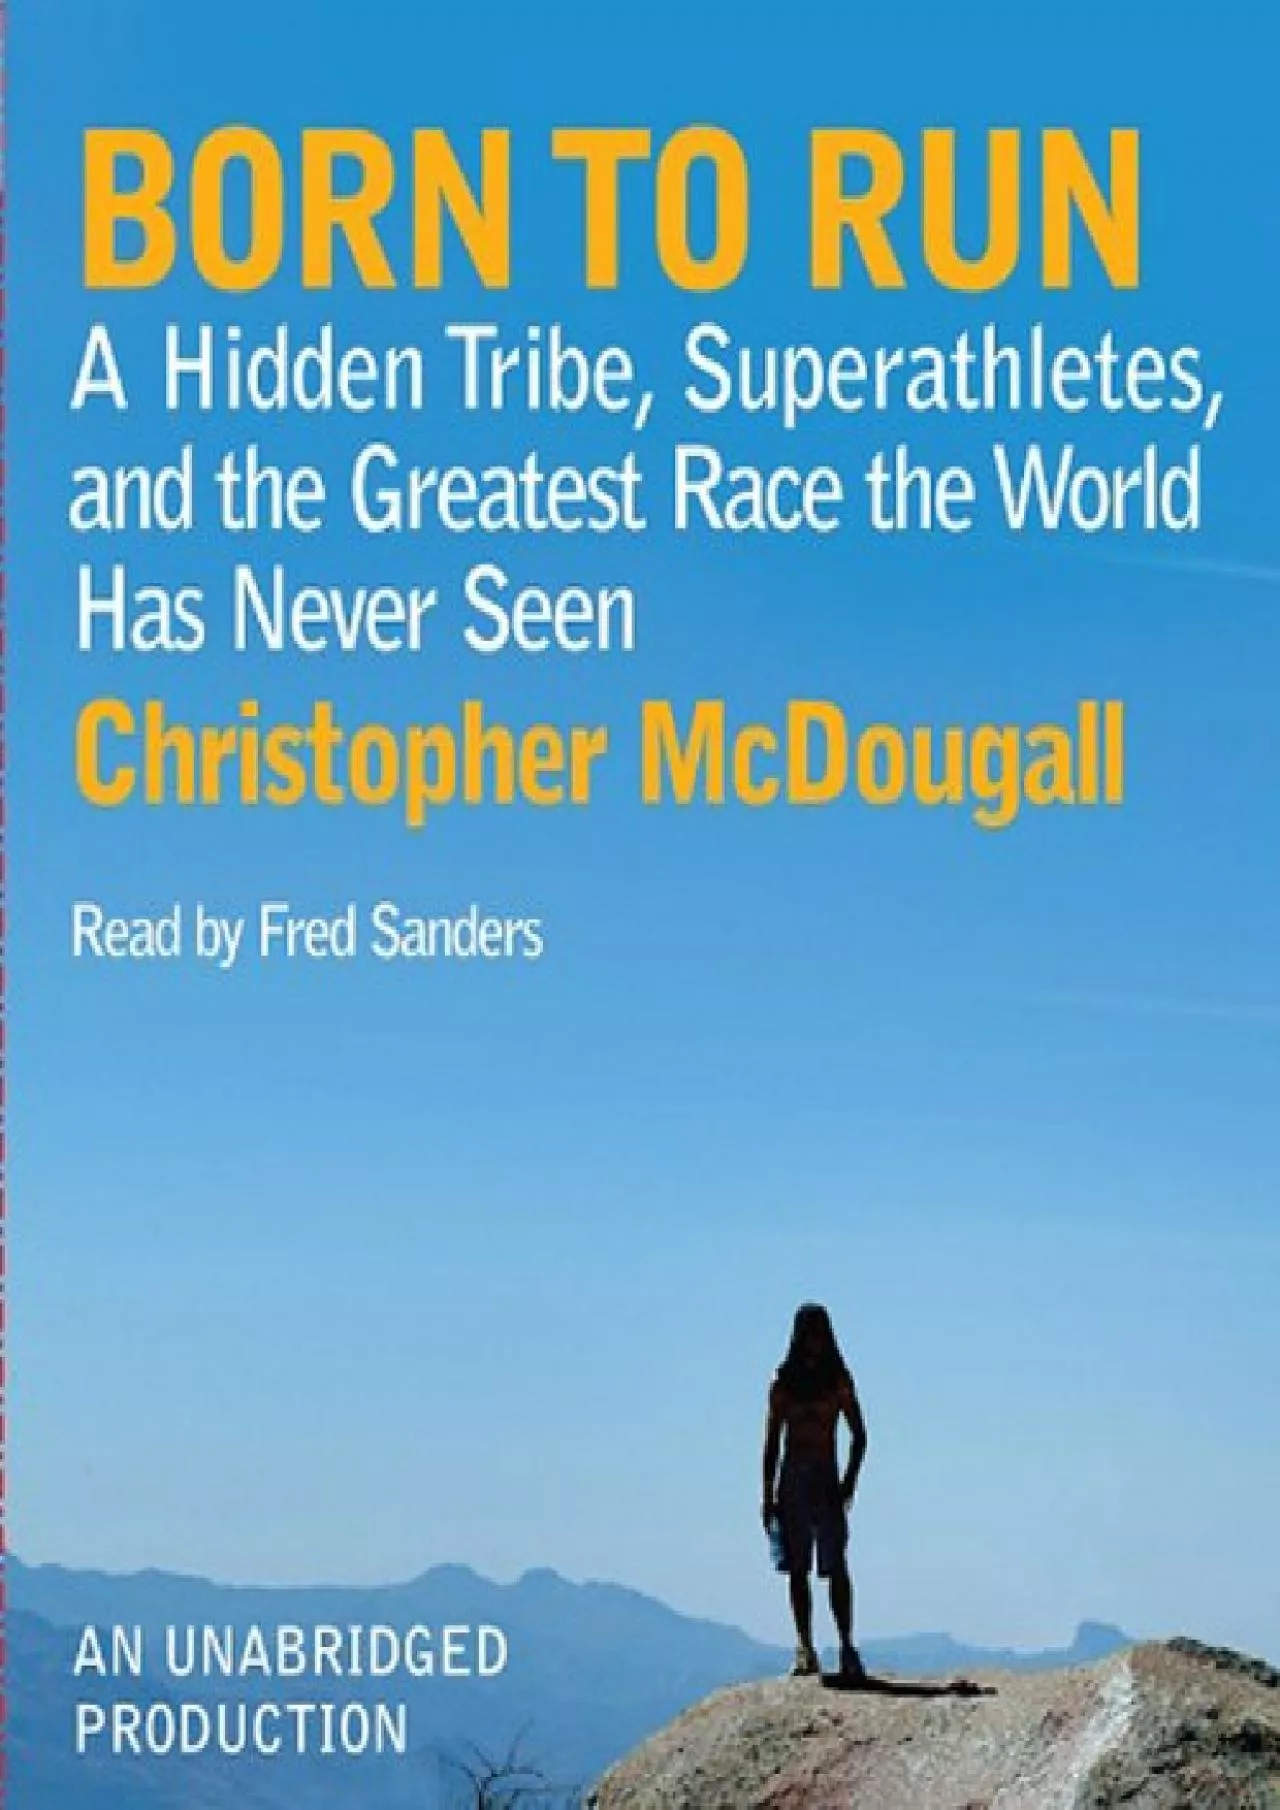 (BOOK)-Born to Run: A Hidden Tribe, Superathletes, and the Greatest Race the World Has